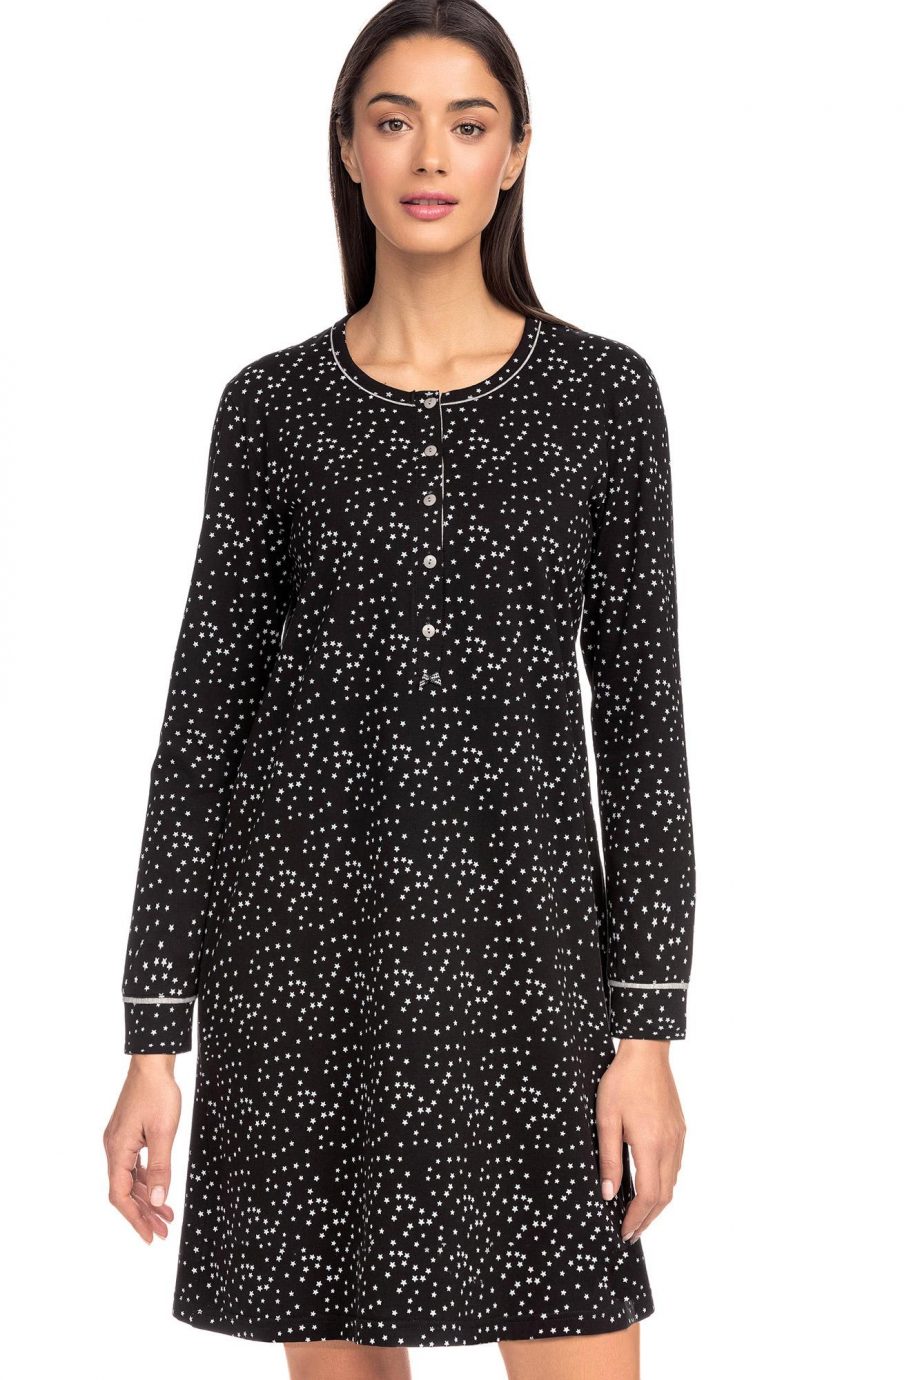 Women’s Nightgown with stars